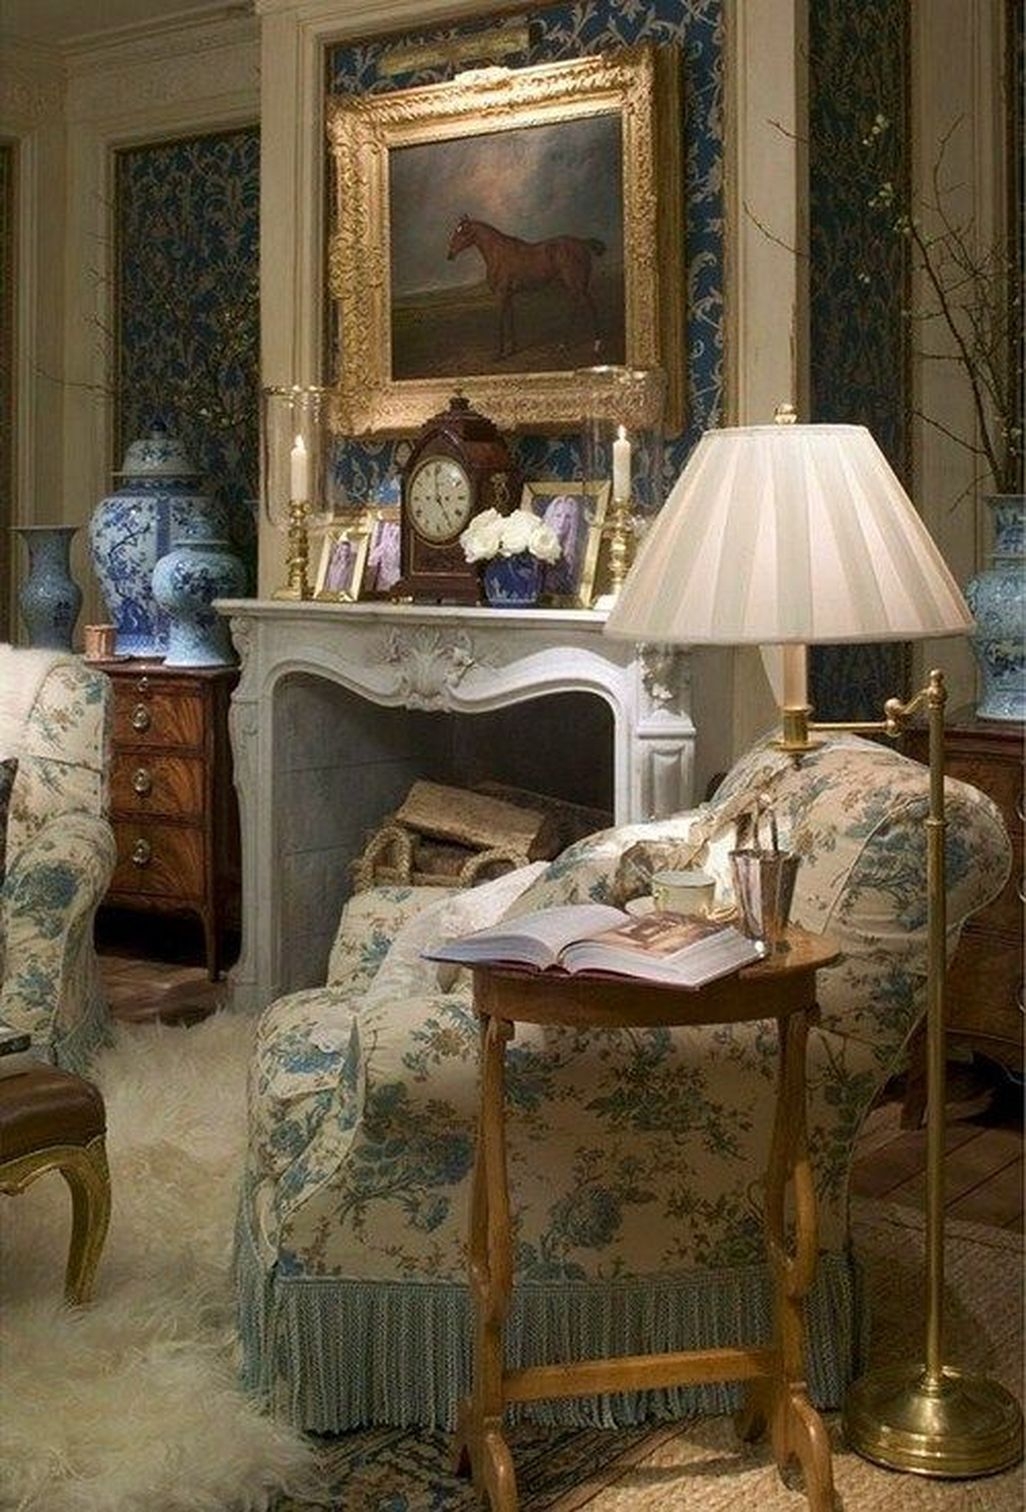 Ralph lauren interior roomsets english mansion a classic english mansion